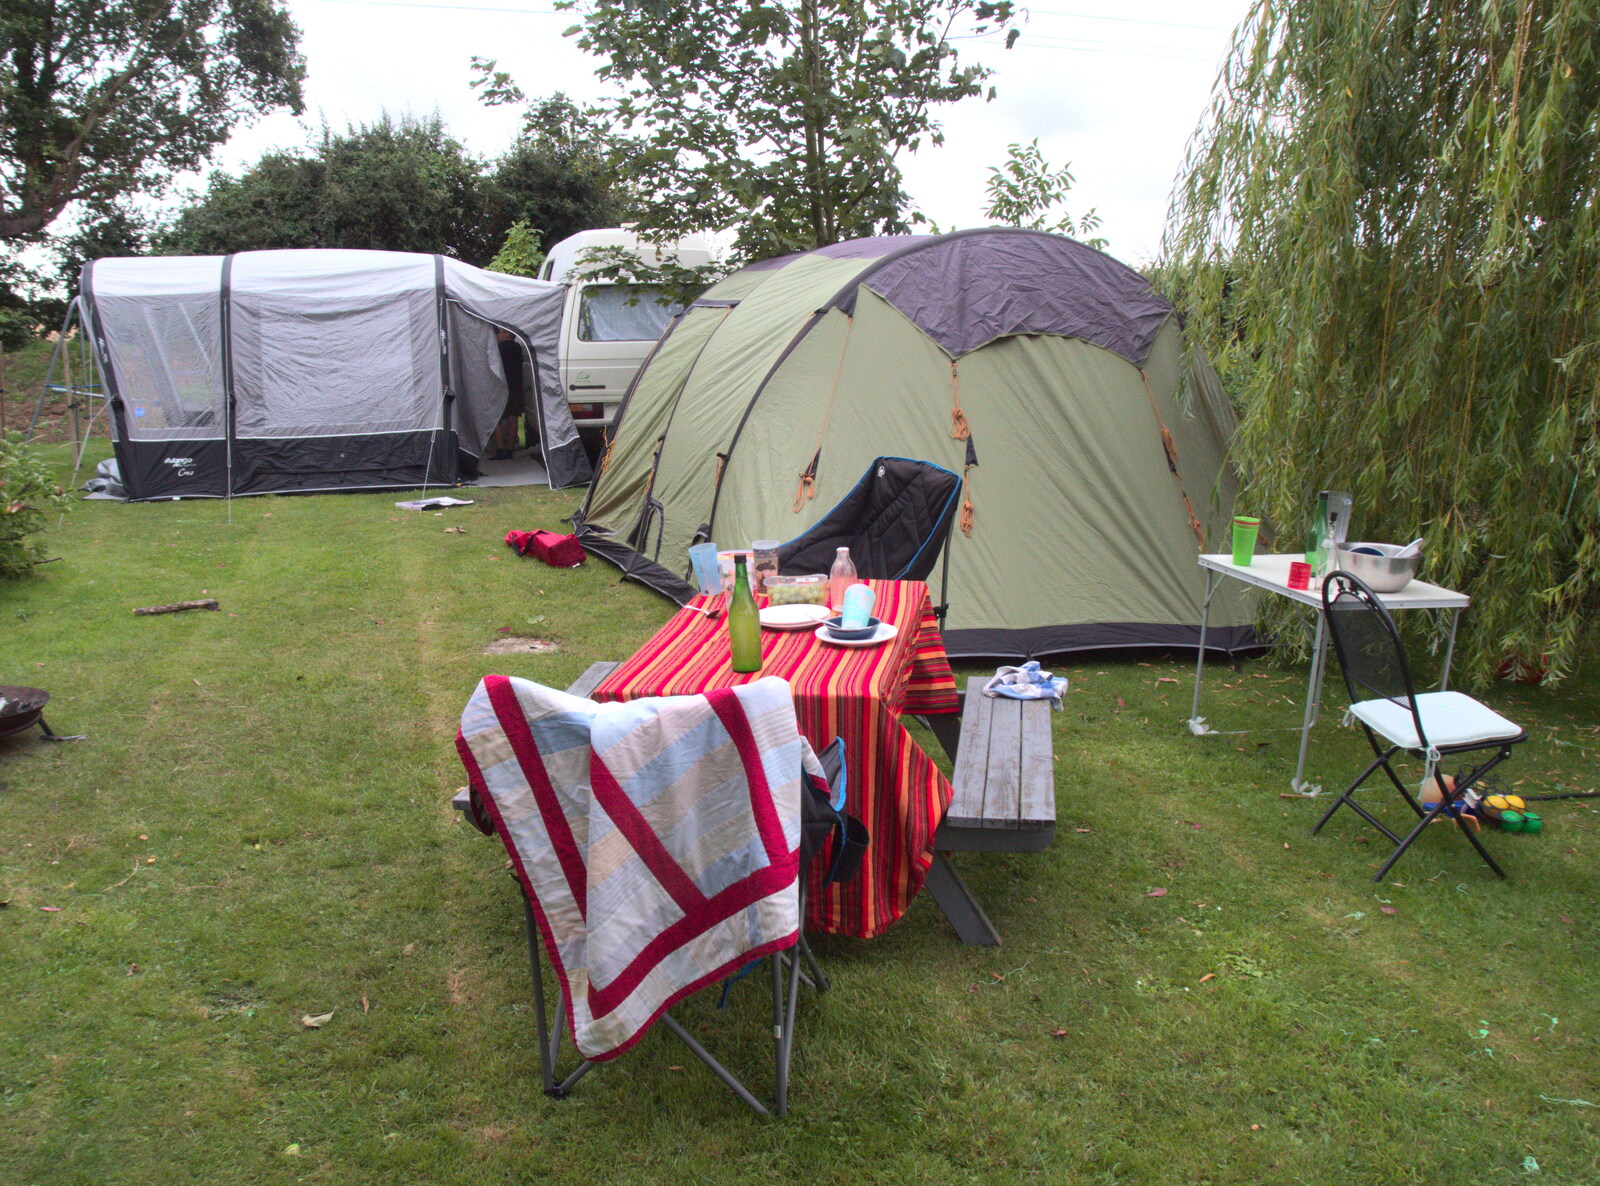 Tents in the garden from The BSCC at Redgrave and Station 119, Eye, Suffolk - 17th July 2020